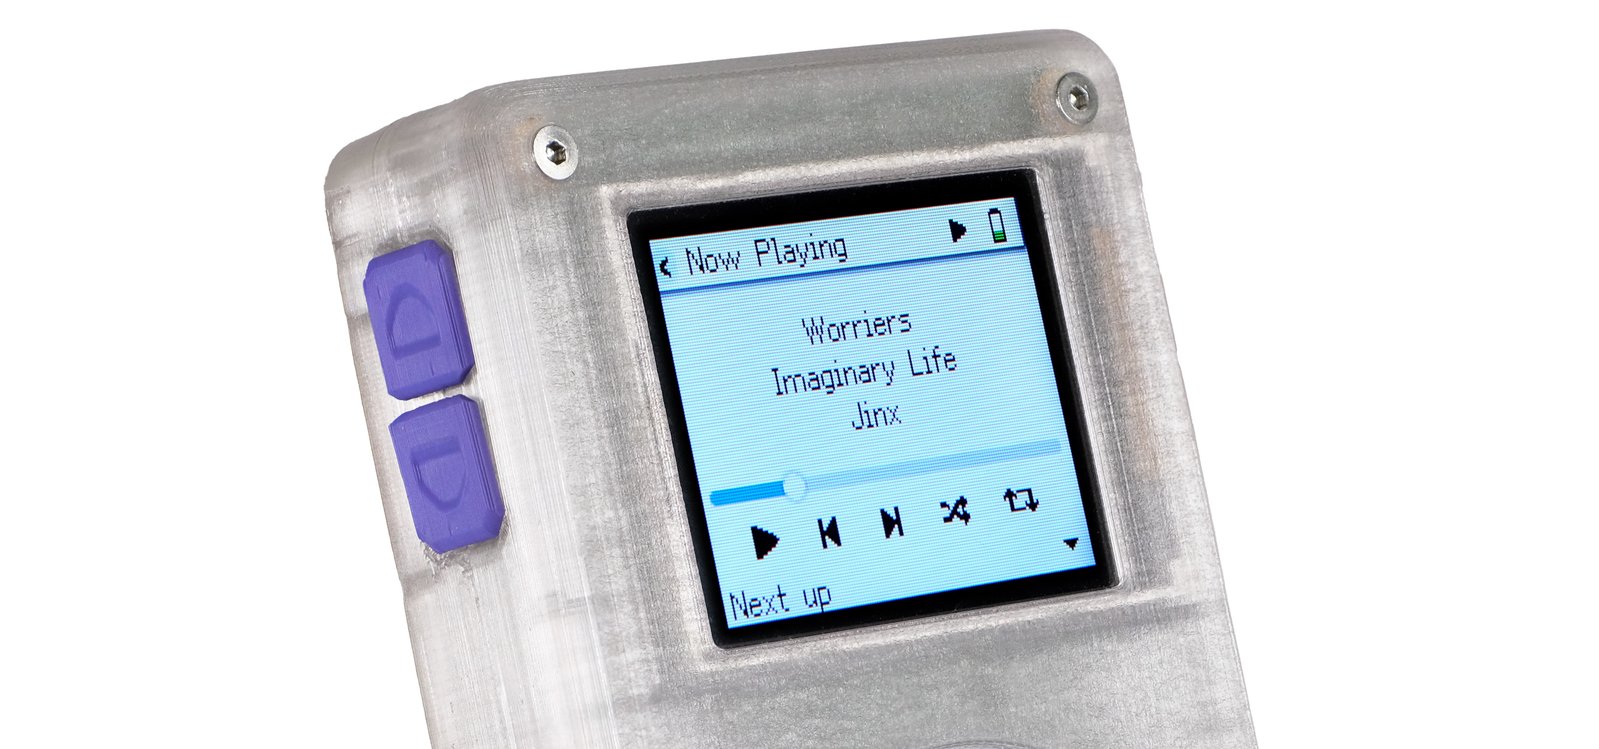 A cropped close-up of a Tangara, showing the screen, side buttons, housed in a 3D-printed translucent case. The screen shows the 'Now Playing' screen; track, artist, album, position and controls are visible.